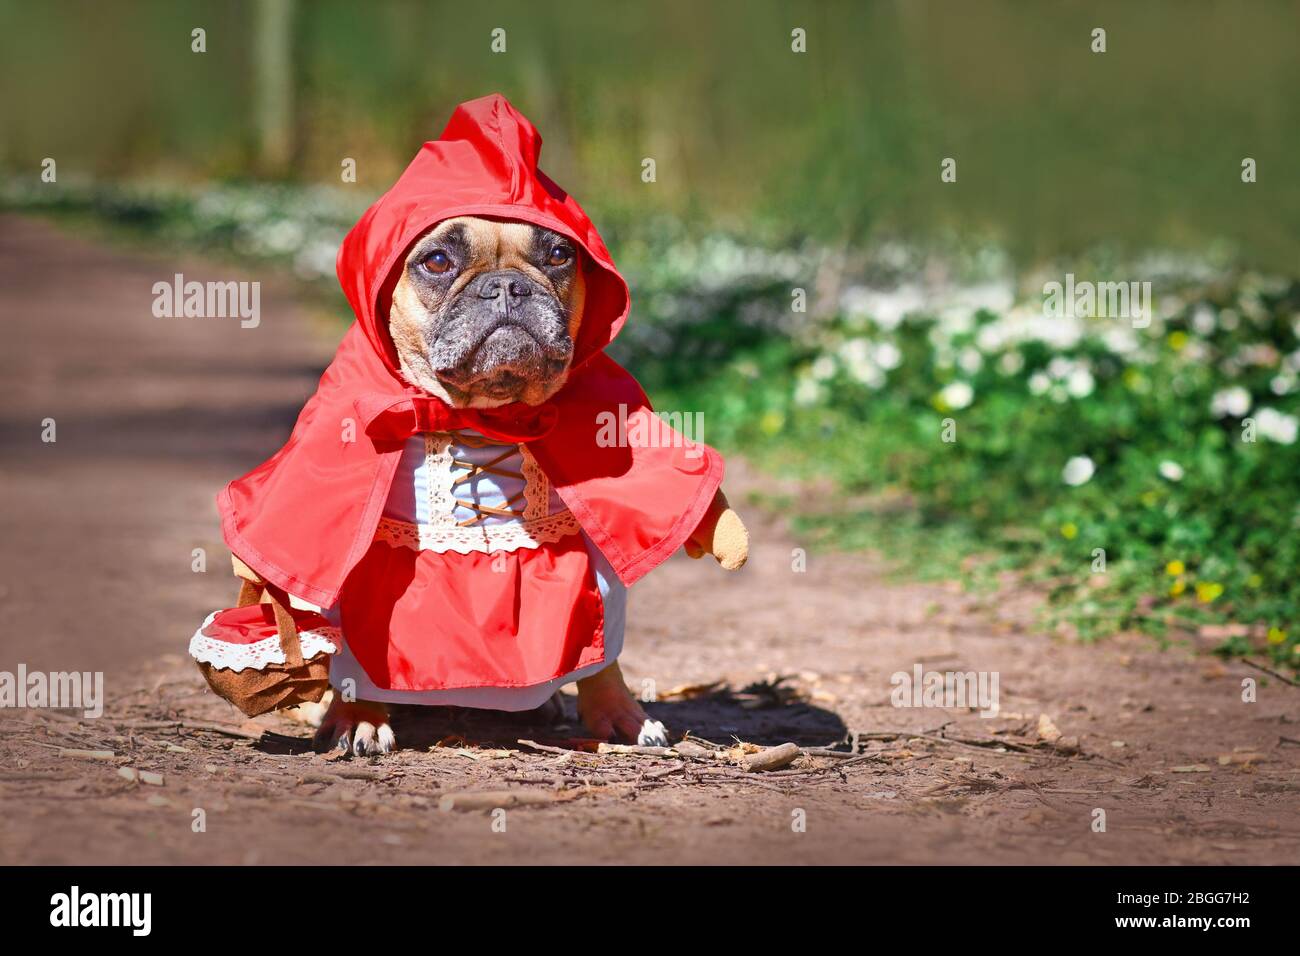 French Bulldog dos dressed up as fairytale character Little Red Riding Hood with full body costumes with fake arms wearing basket in forest Stock Photo